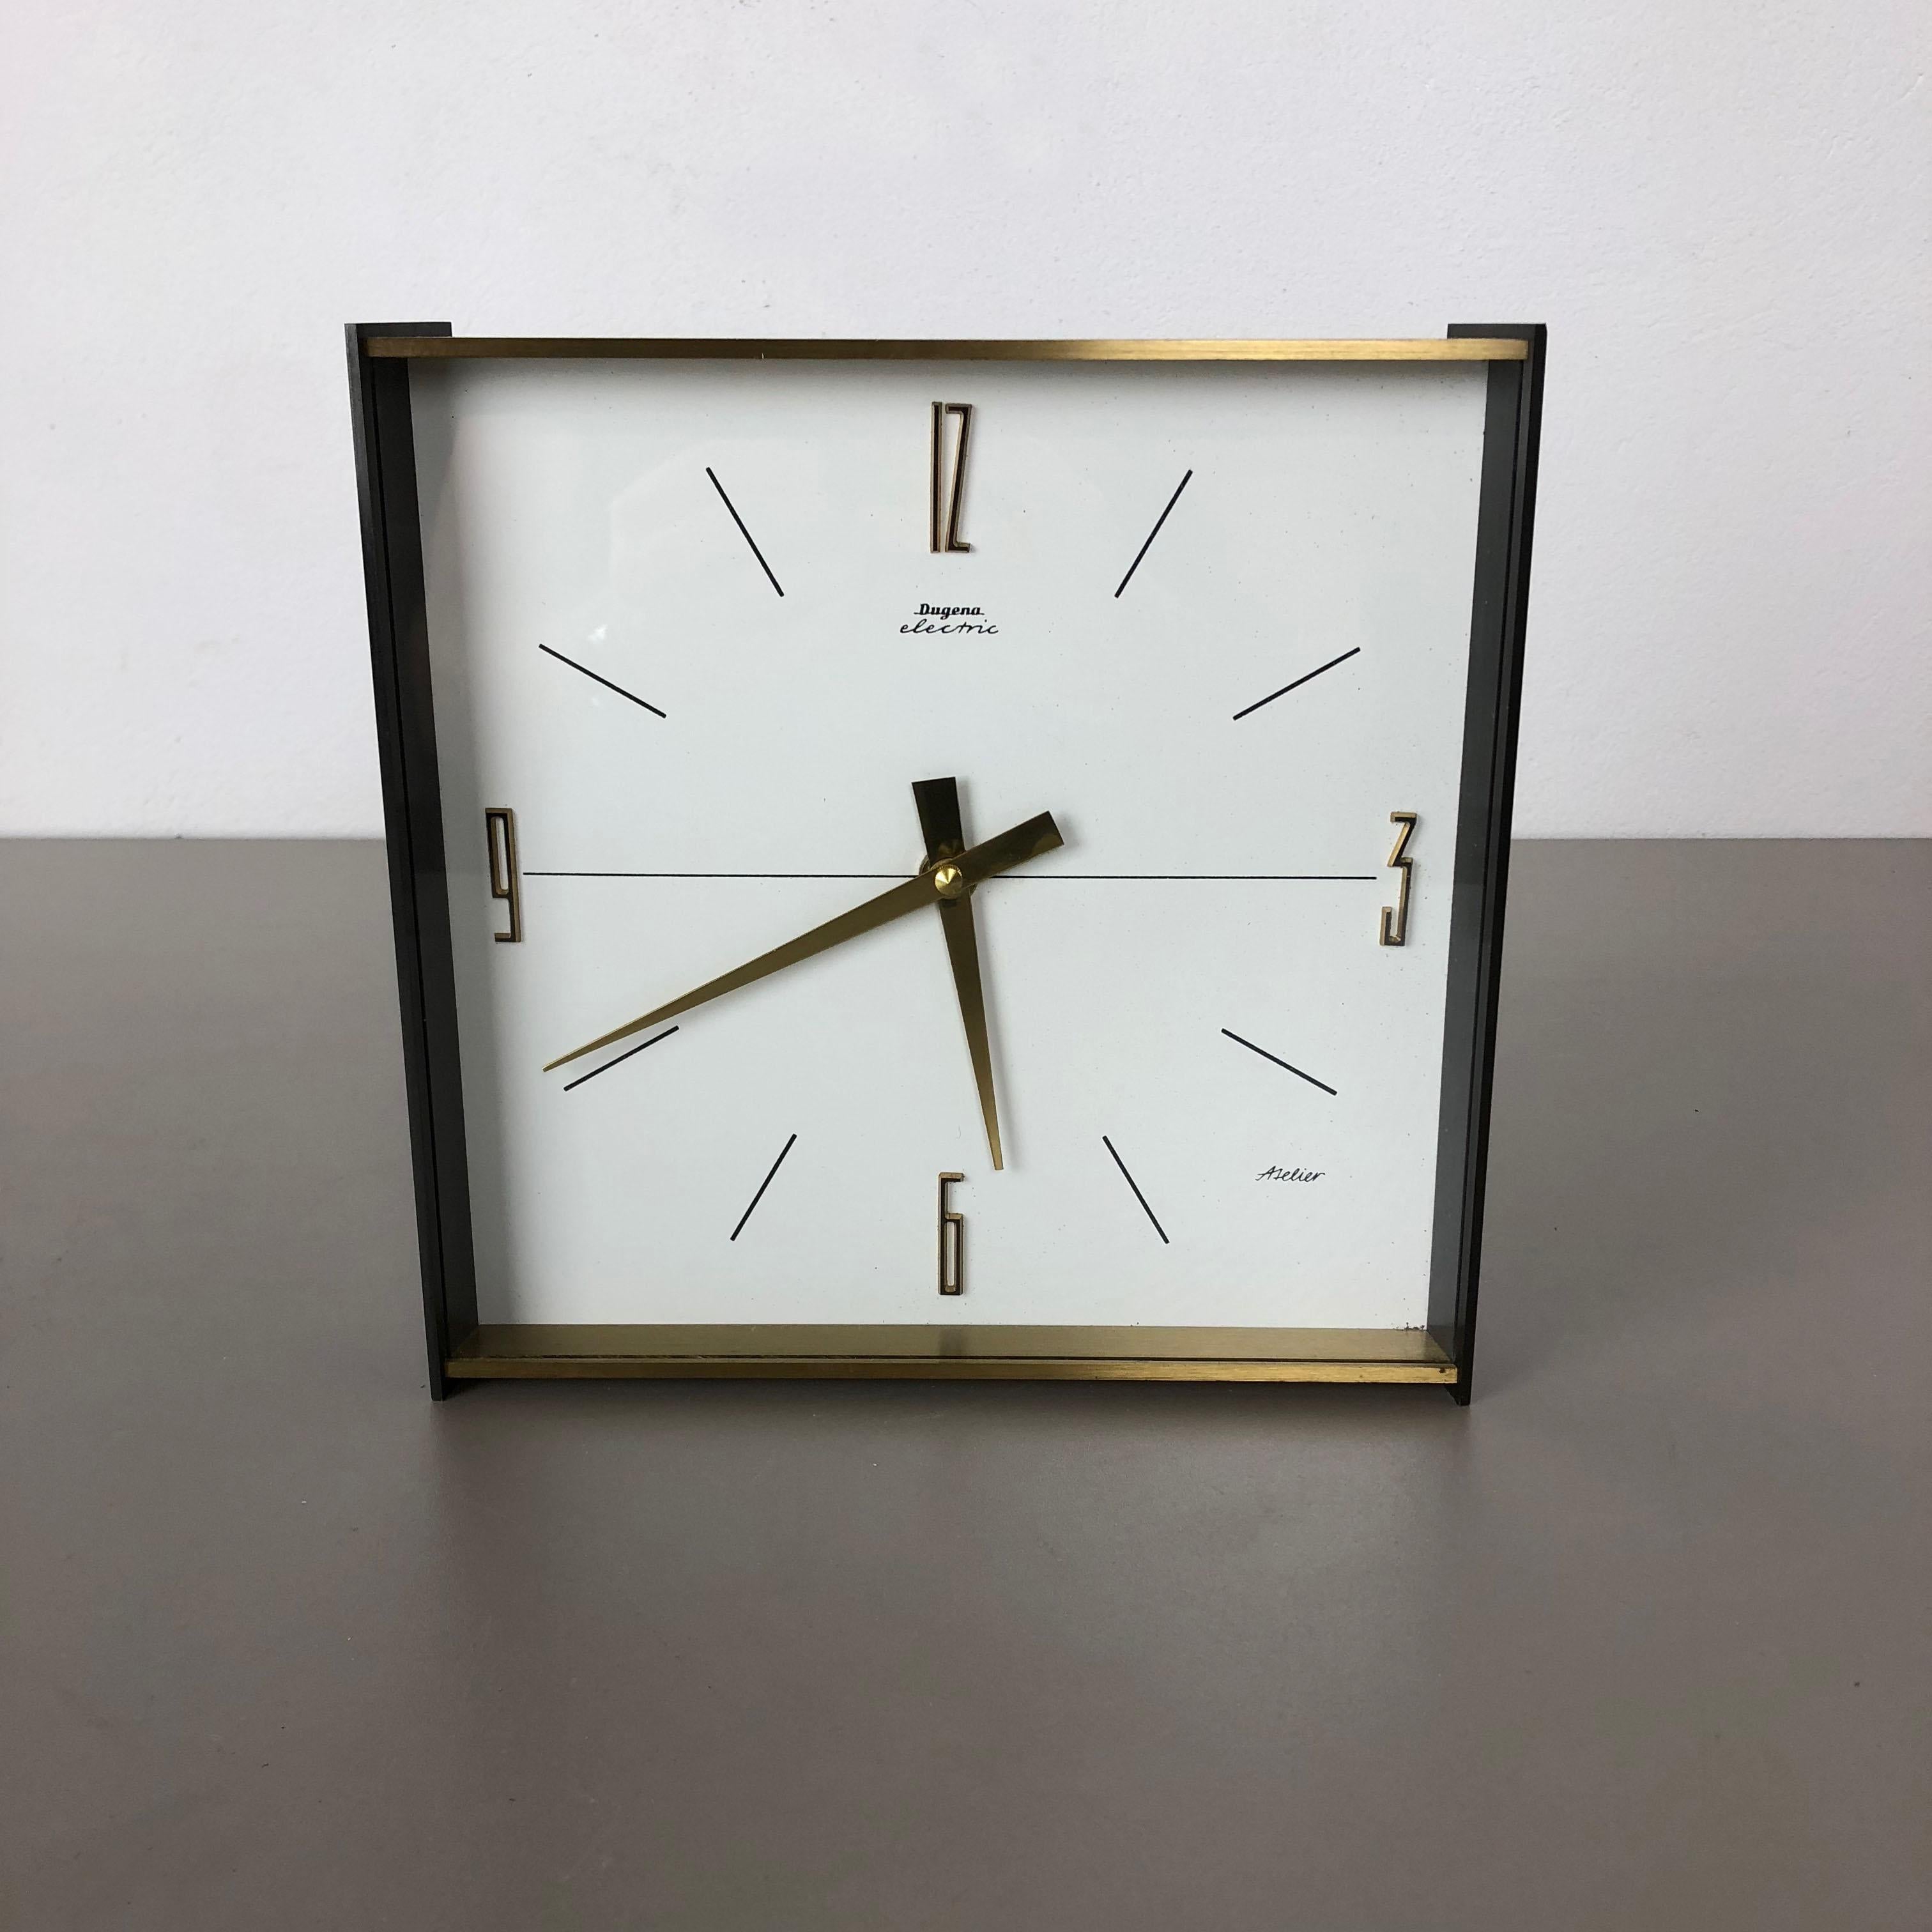 Article:

Table clock, wall clock



Origin:

Germany


Producer:

Dugena Electric, Germany


Age:

1960s



Description:

This original vintage table clock was produced in the 1960s by the premium clock producer Dugena in